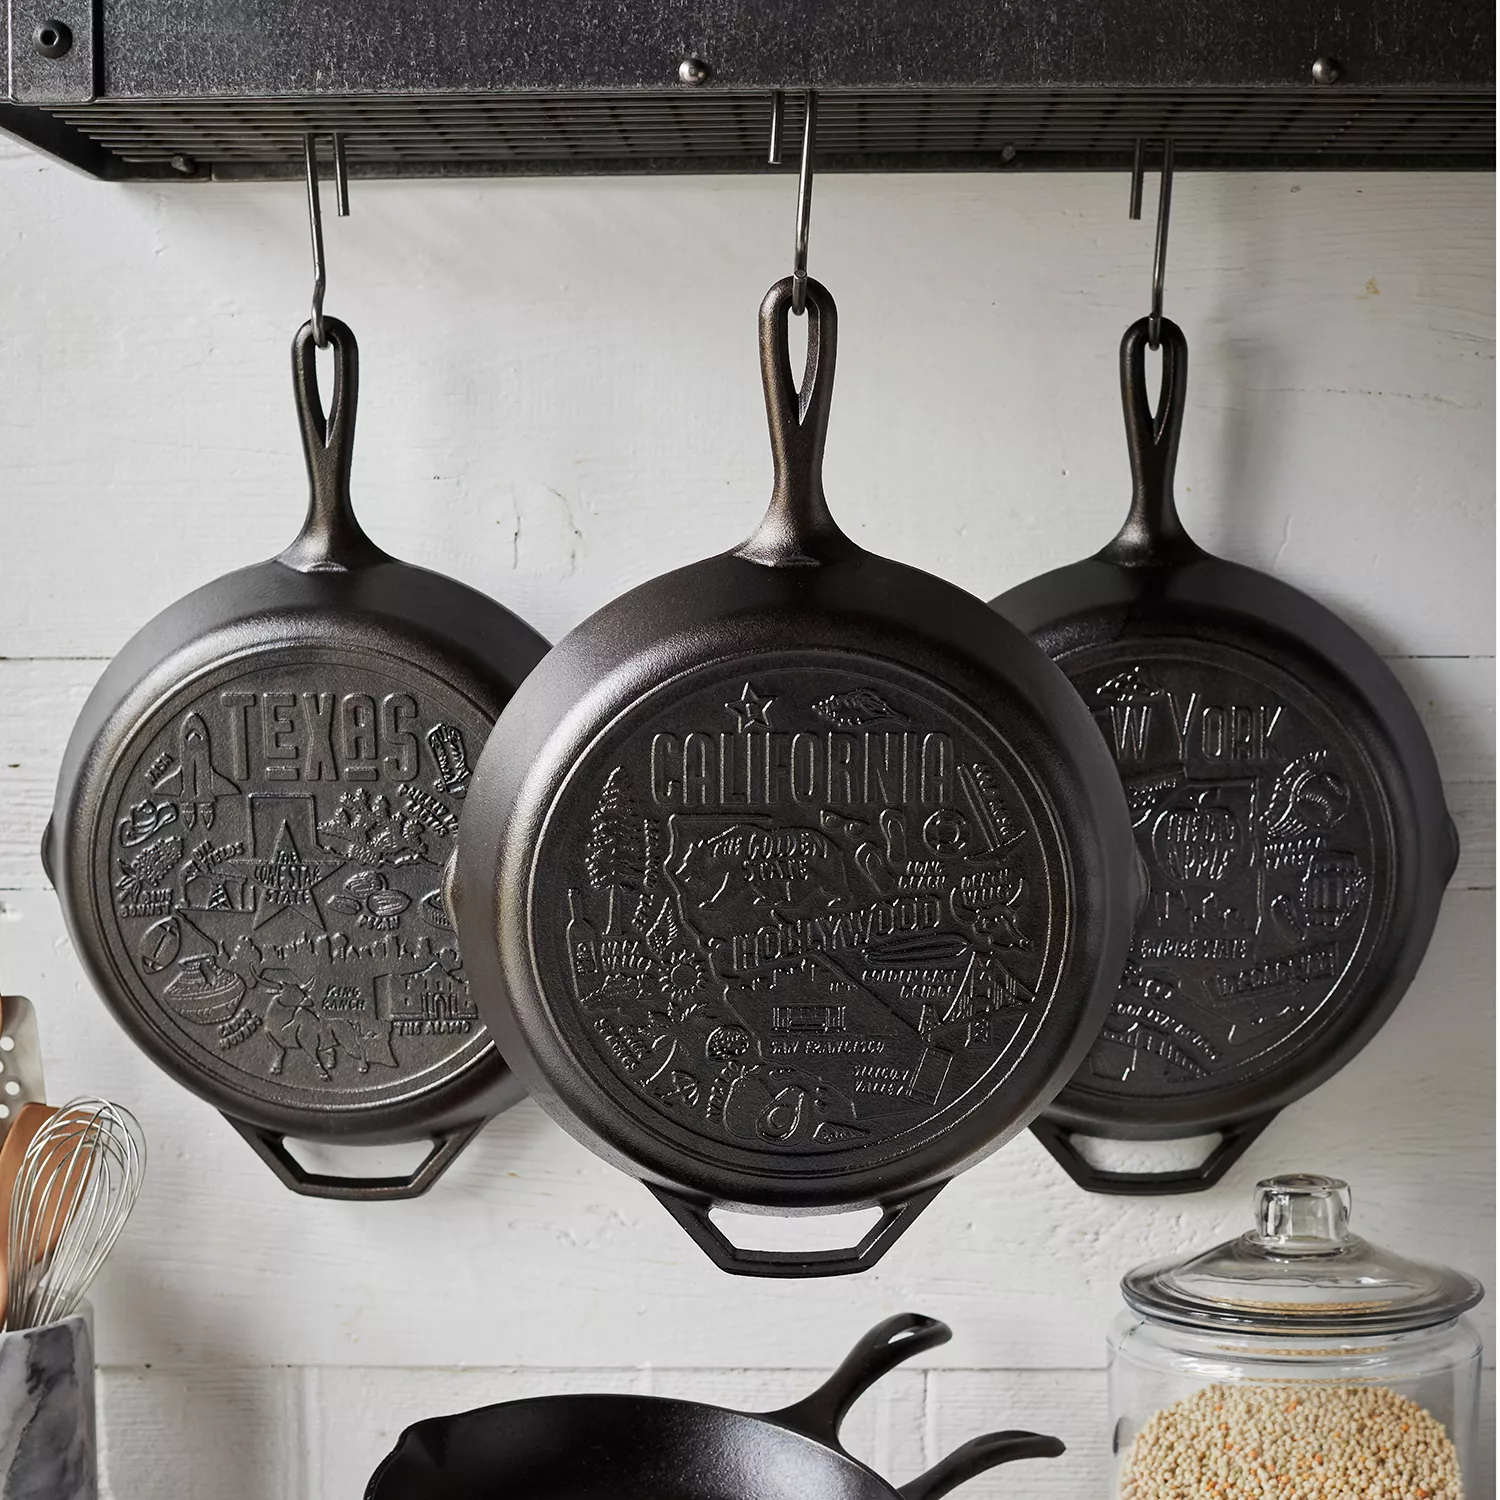 Cast iron Steve - I think it's time to make another skillet rack